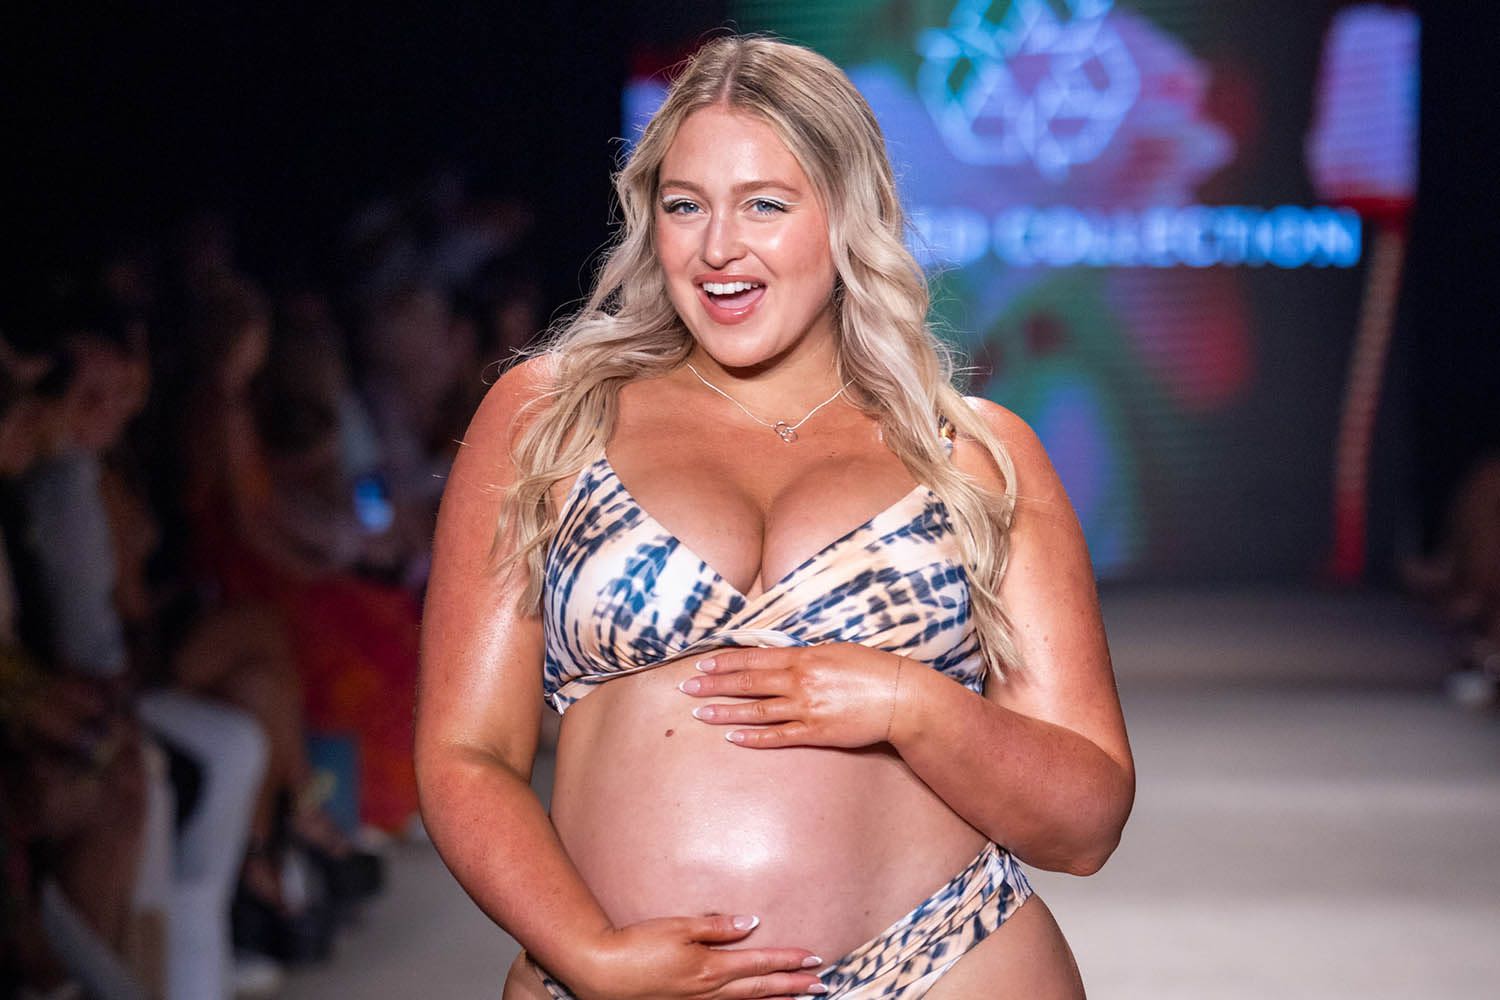 Pregnant Iskra Lawrence Claps Back at Trolls for 'Fat Shaming' Her: ‘Still in Disbelief'